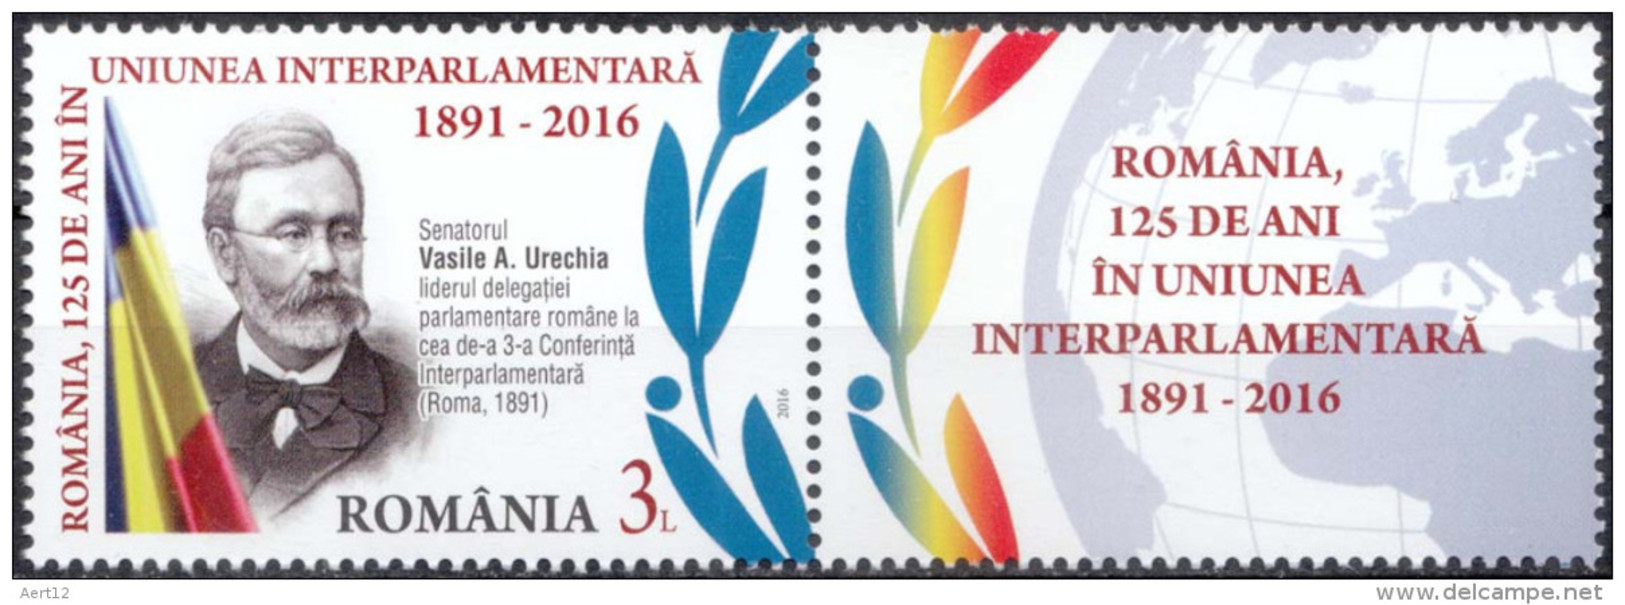 ROMANIA, 2016, 125 YEARS IN THE IPU, International Organizations, Famous People, Stamp Vith Label, MNH (**), LPMP 2101 - Ungebraucht